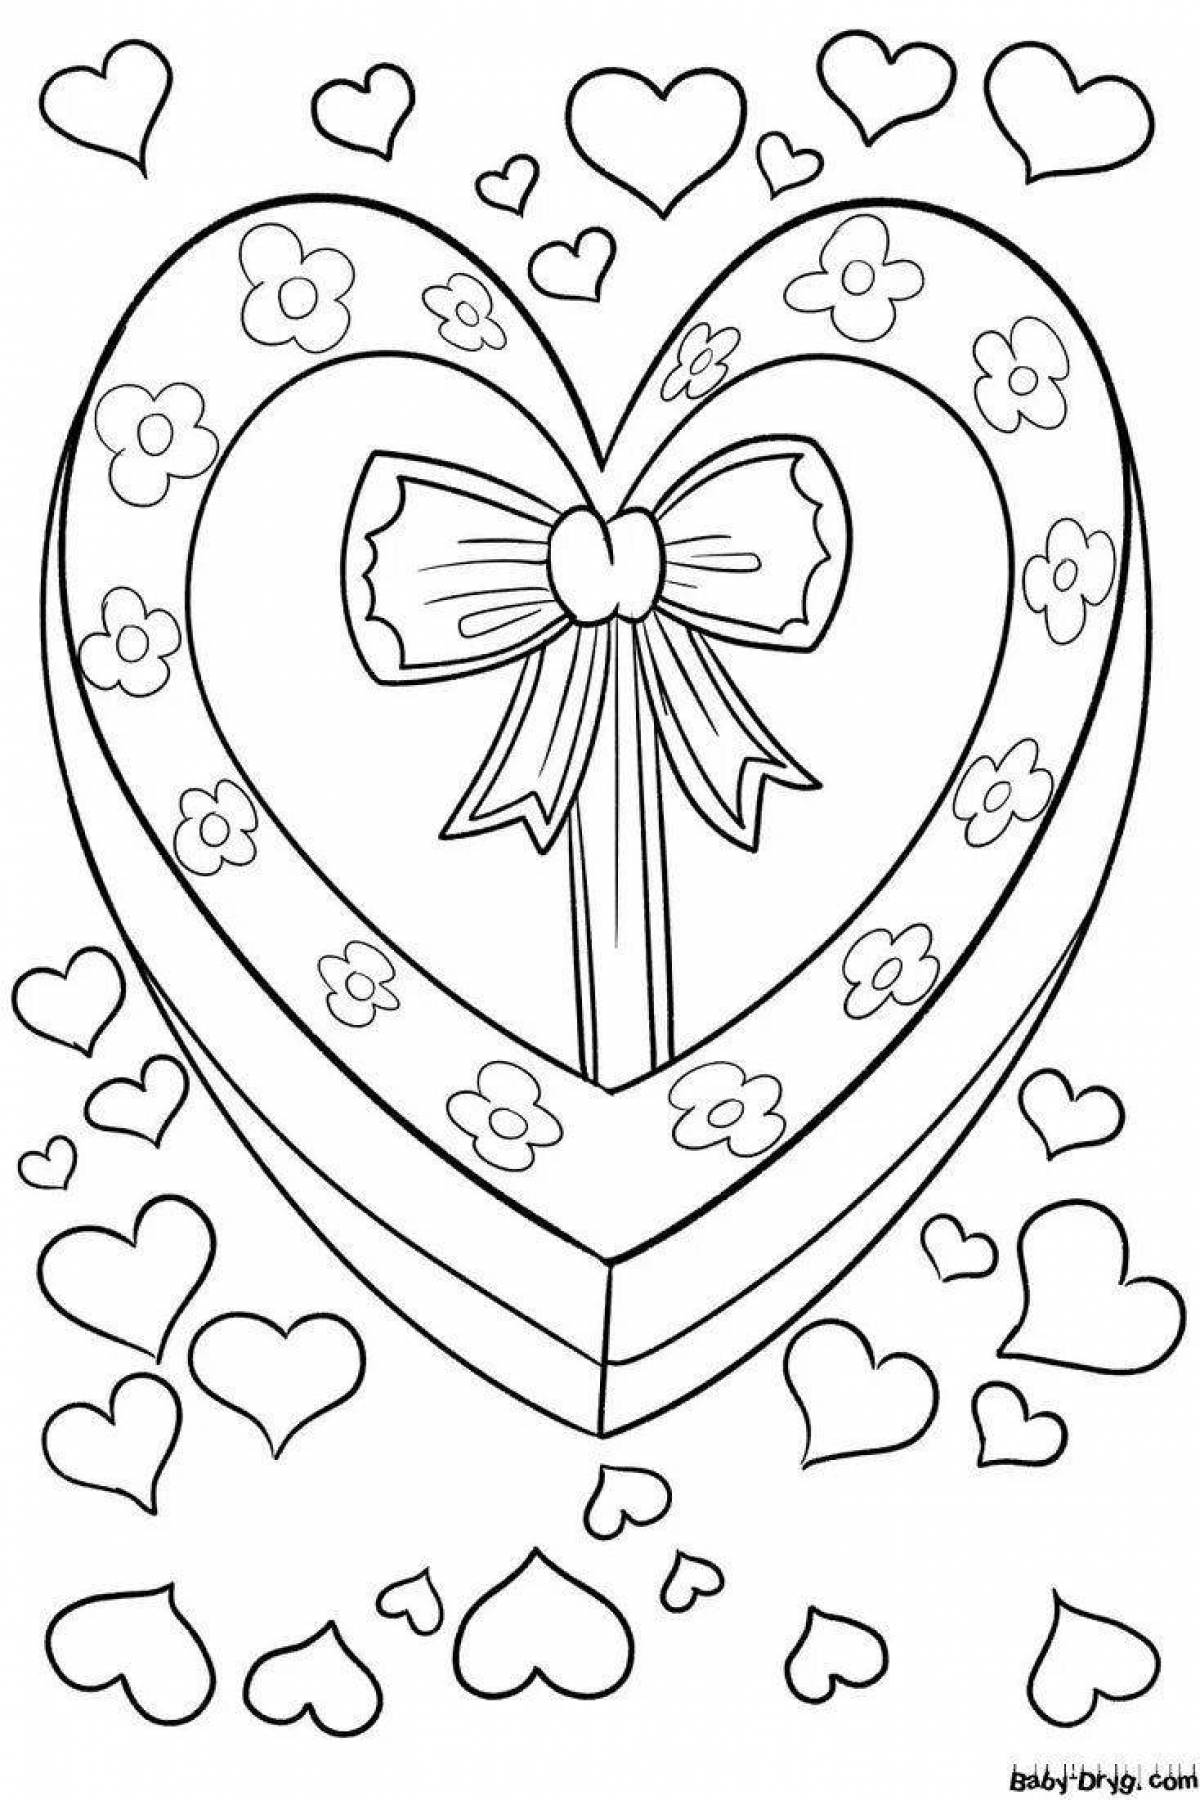 Violent great gift coloring book